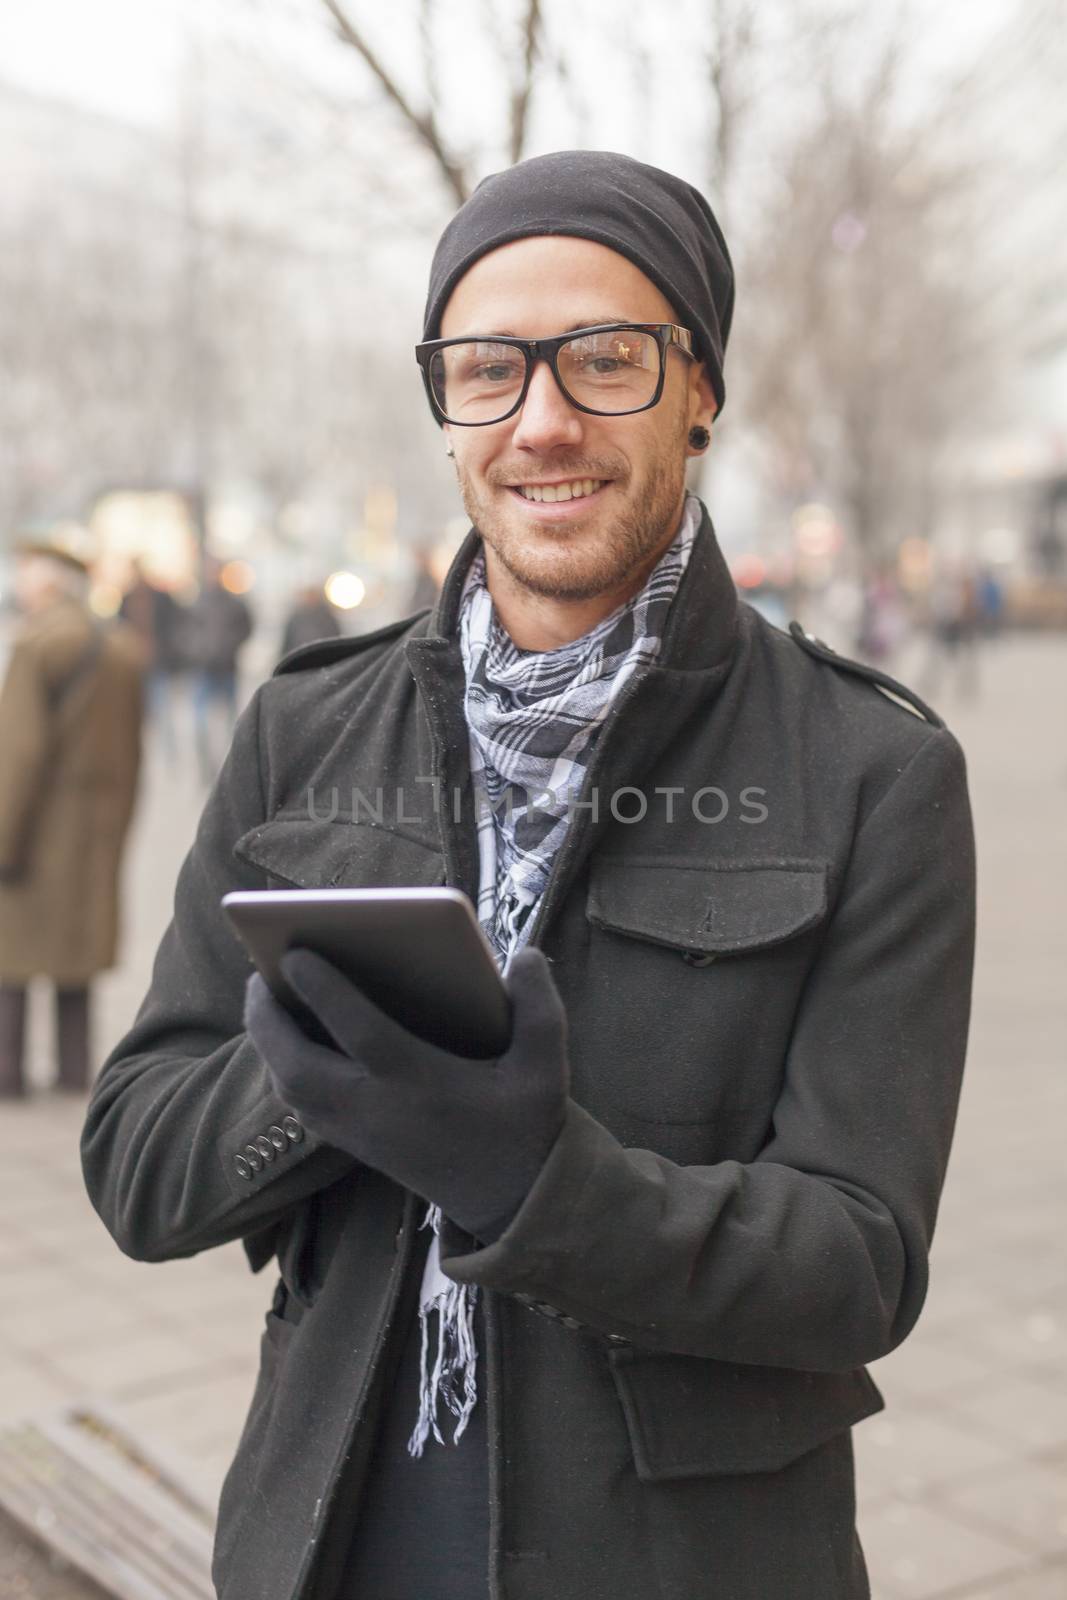 Young man reading messages and information using an i-pad tablet computer.